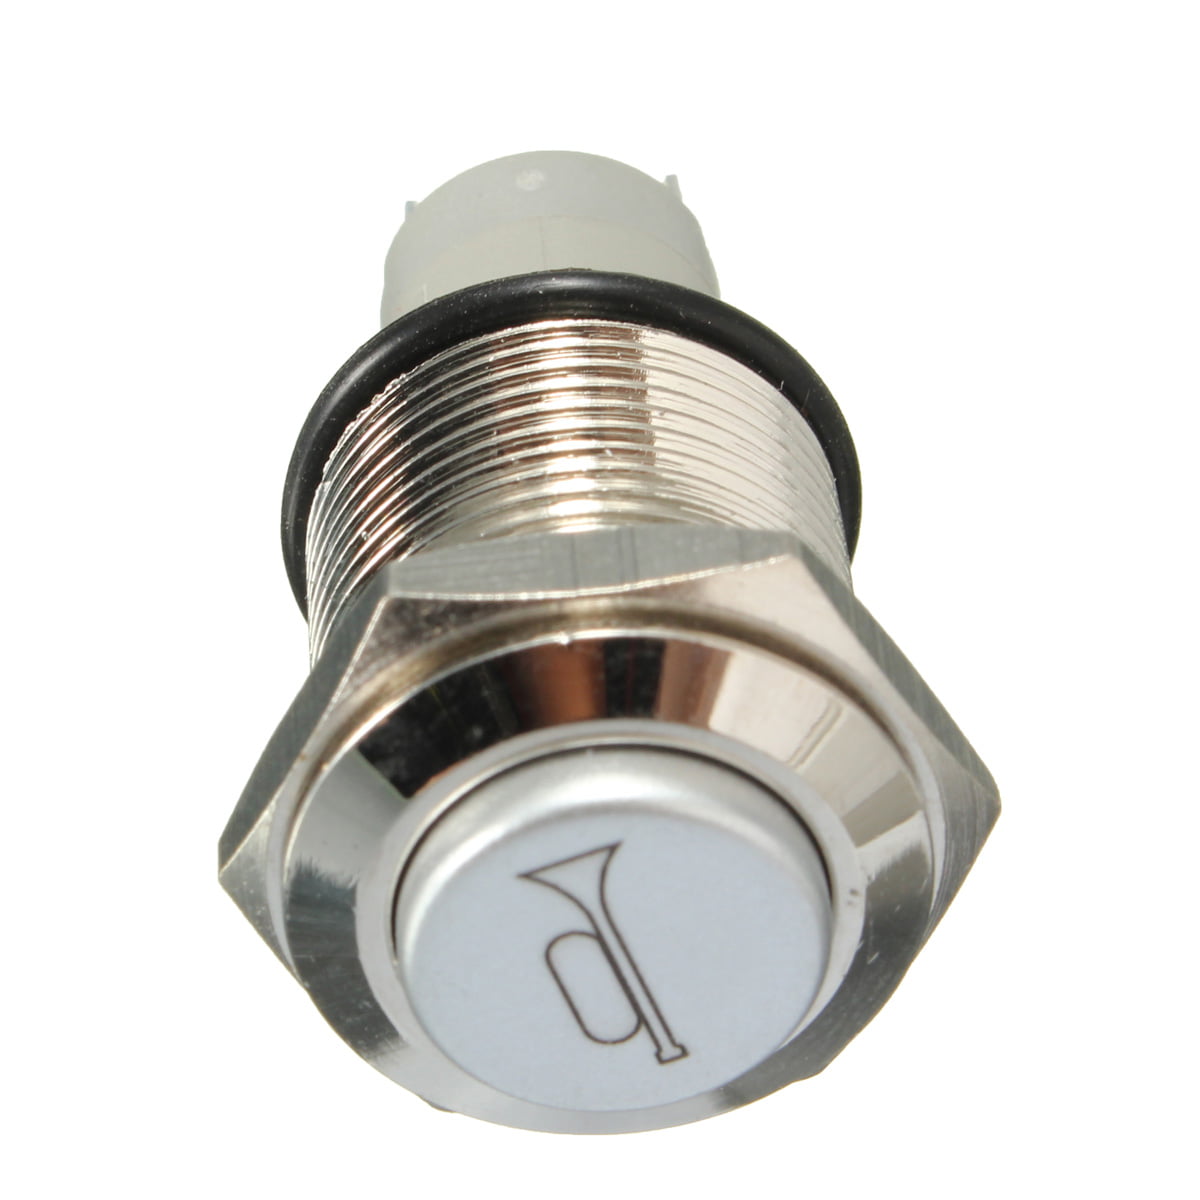 Cocas EE Support 19mm 12V Push Button Lighted Blue LED Momentary Horn Button Metal Switch Car Styling XY01